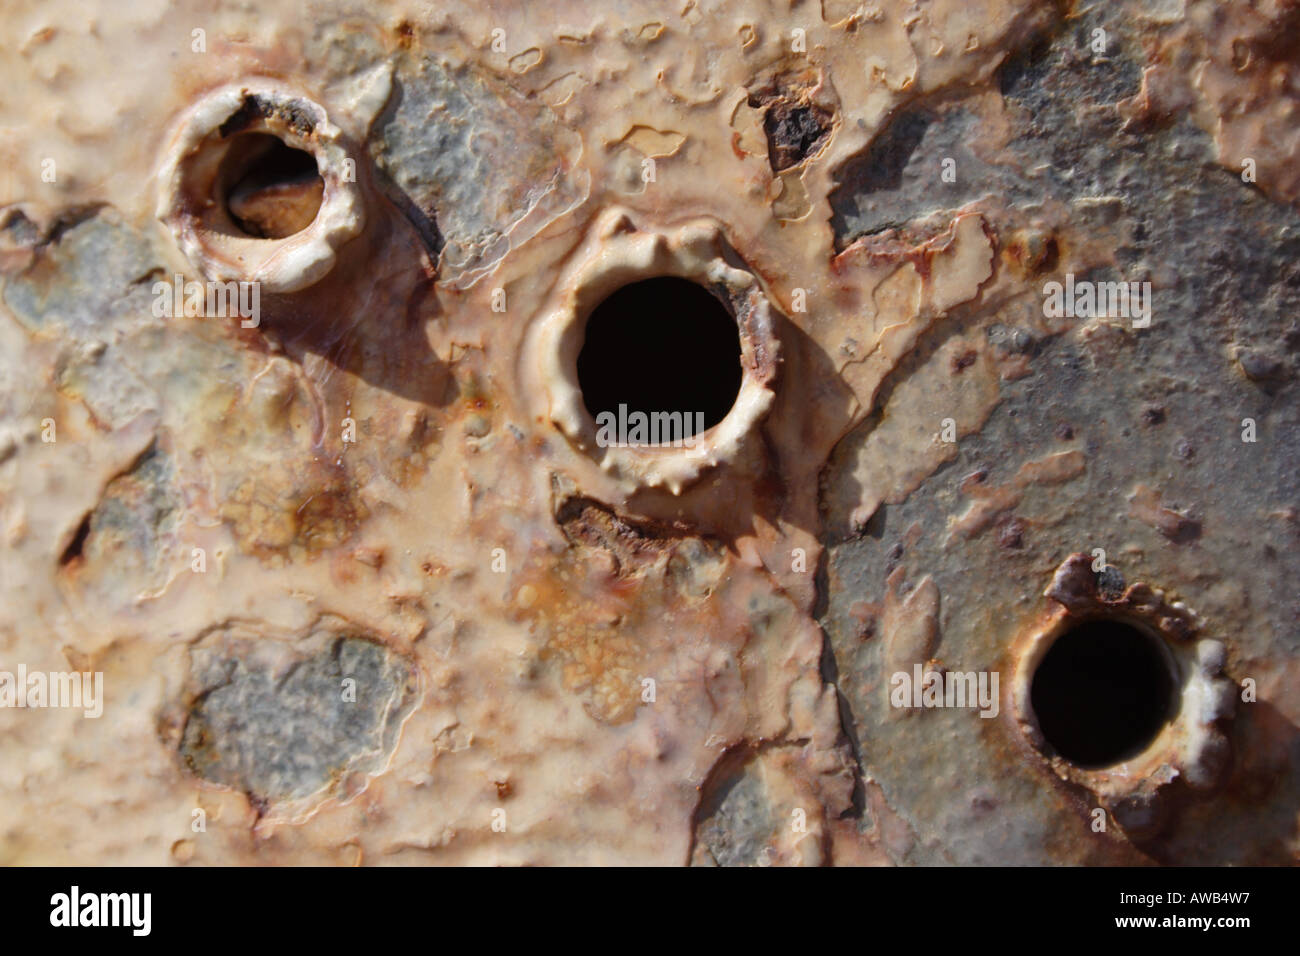 3 bullet holes through a metal pipe rusted and encrusted by minerals at Crystal Geyser Stock Photo